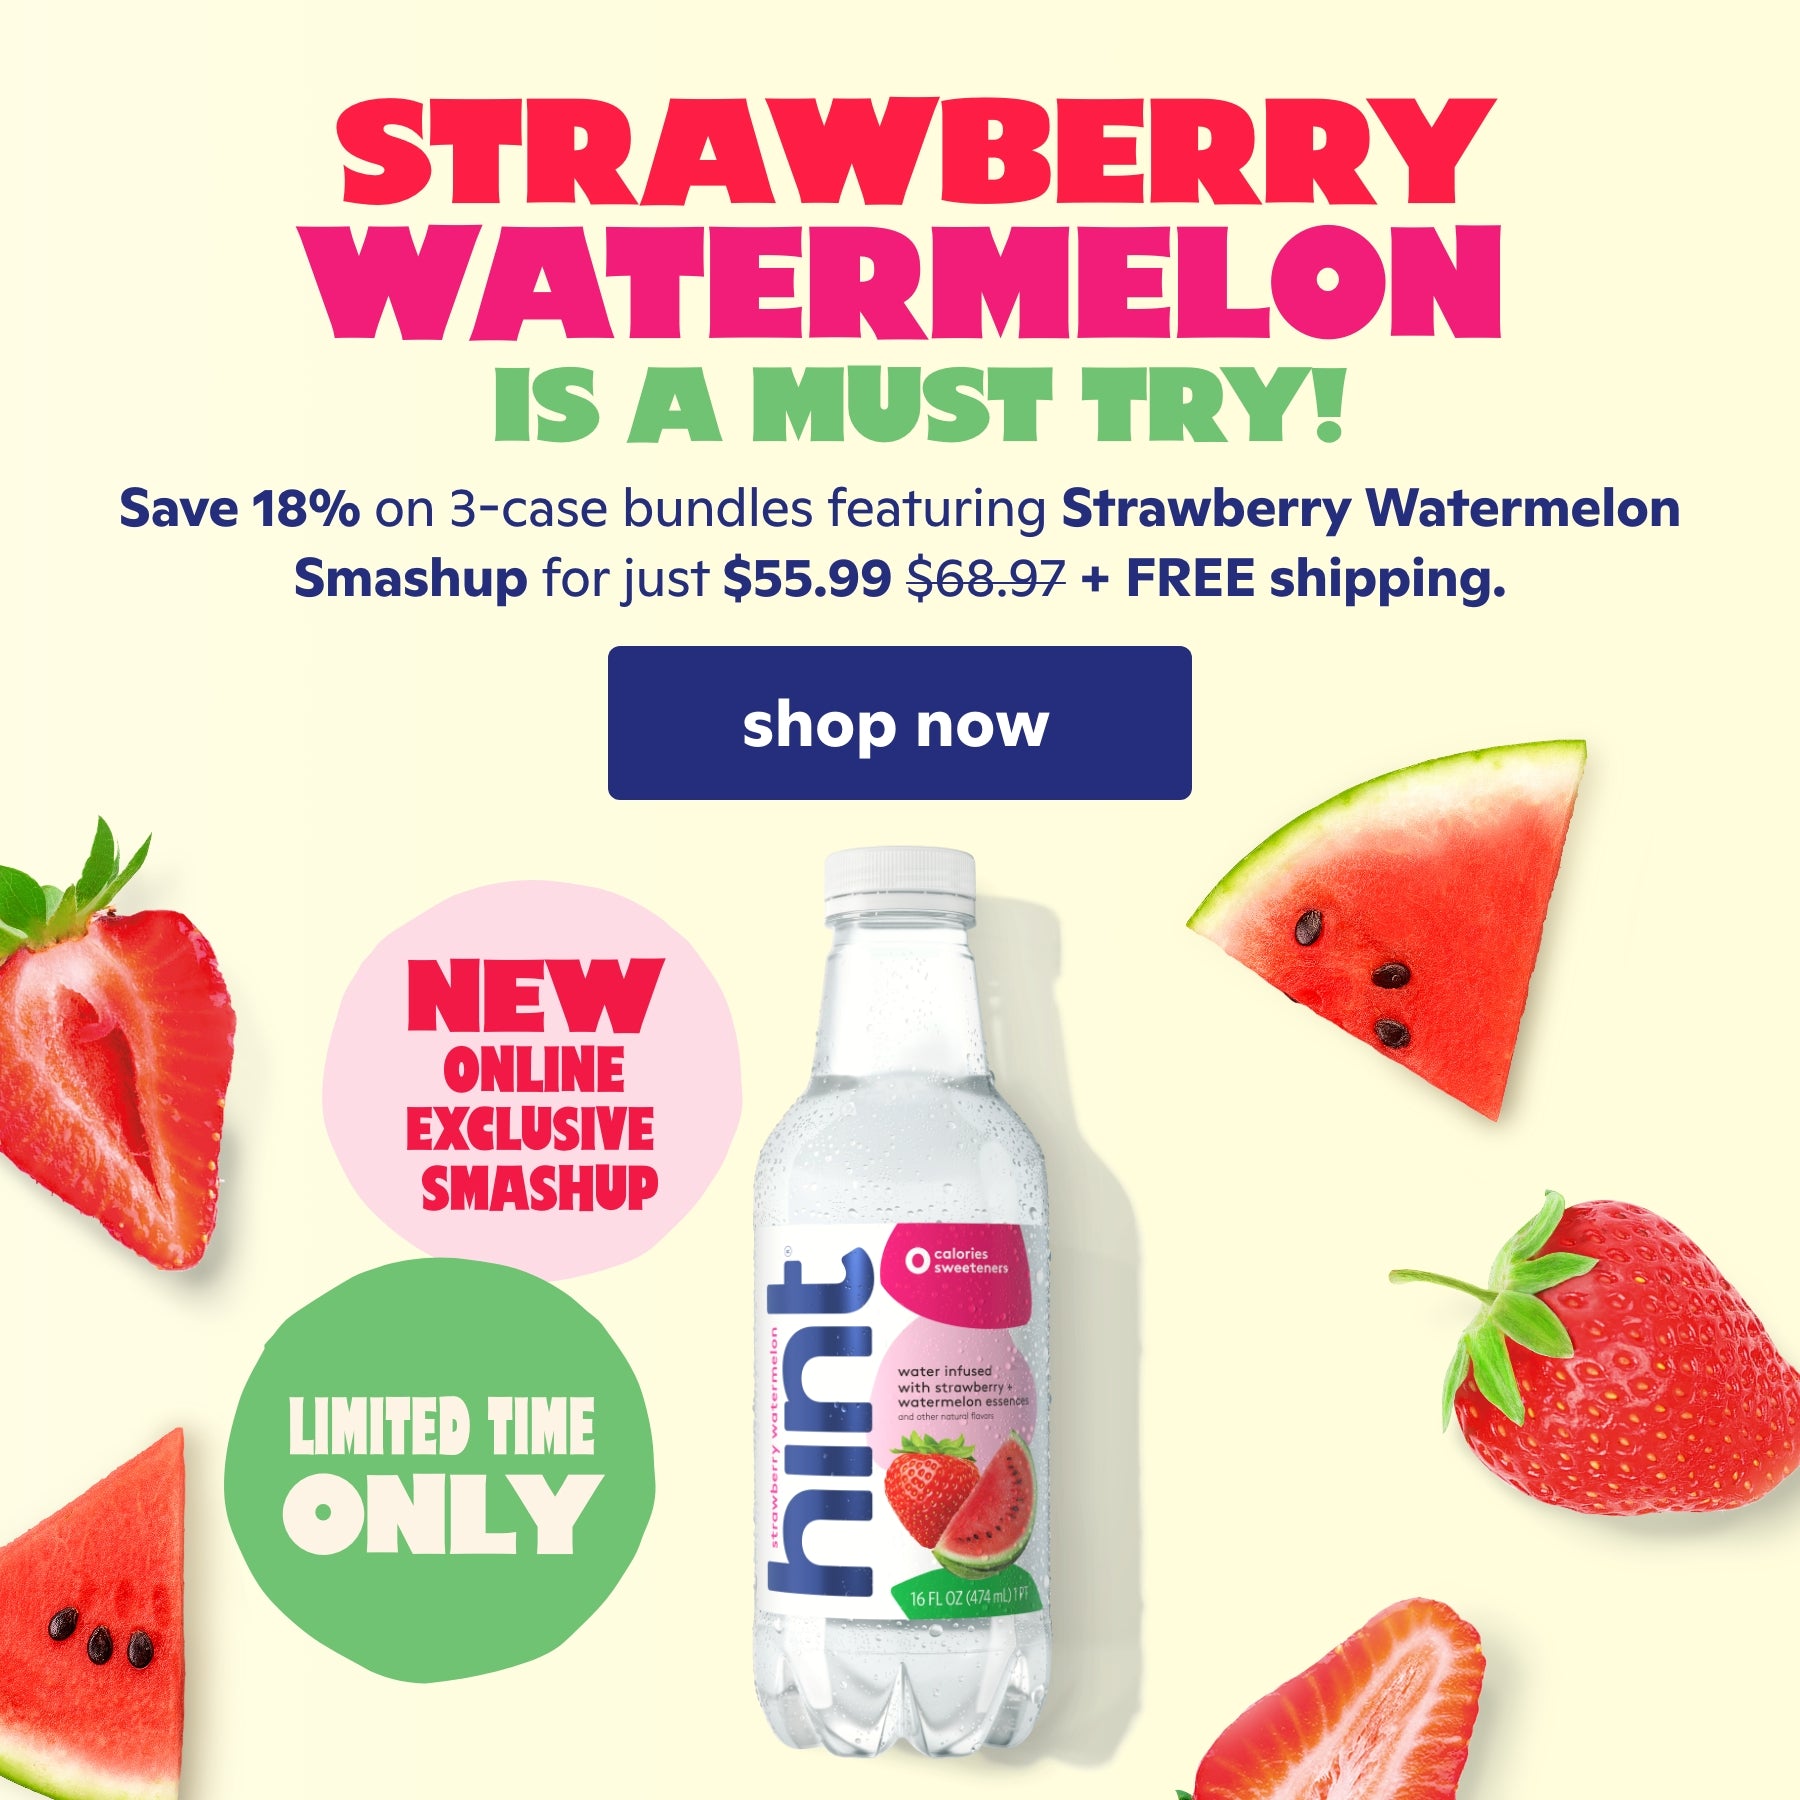 <h1>Strawberry Watermelon is a must try!</h1><p><br> Save 18% on 3 case bundles featuring Strawberry Watermelon for just $55.99 + free shipping </p> <br> shop now